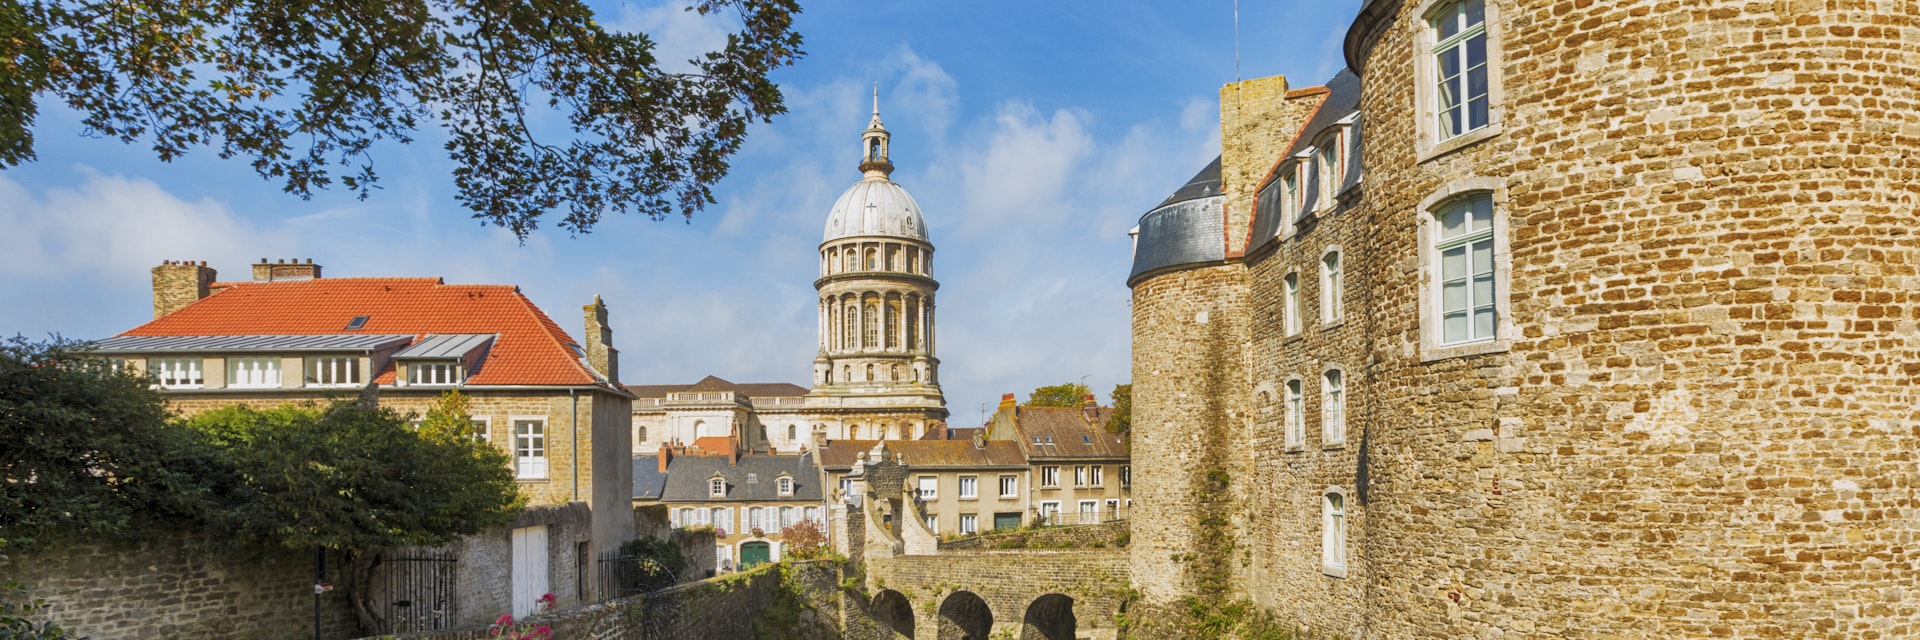 Fortified city of Boulogne-sur-Mer with castle in foreground and Basilica of Our Lady of the Immaculate Conception in background.